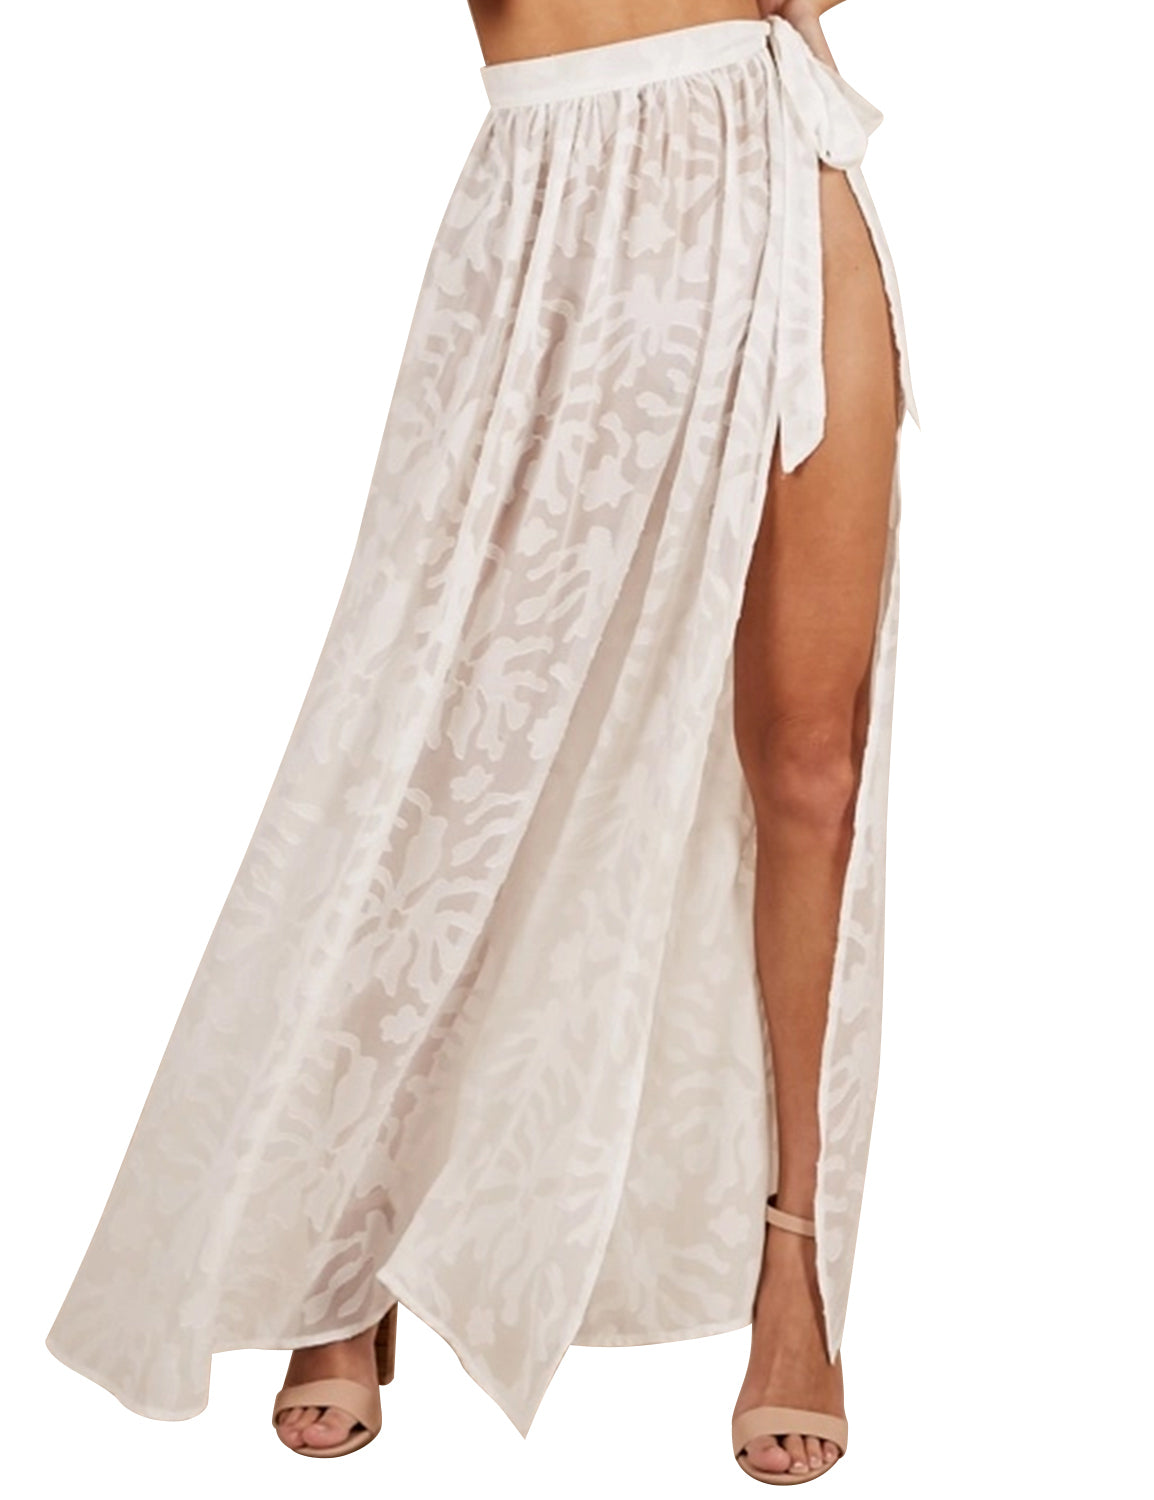 Gorgeous Beauty Silk Lace Long Wrap Skirt - Blooming Jelly